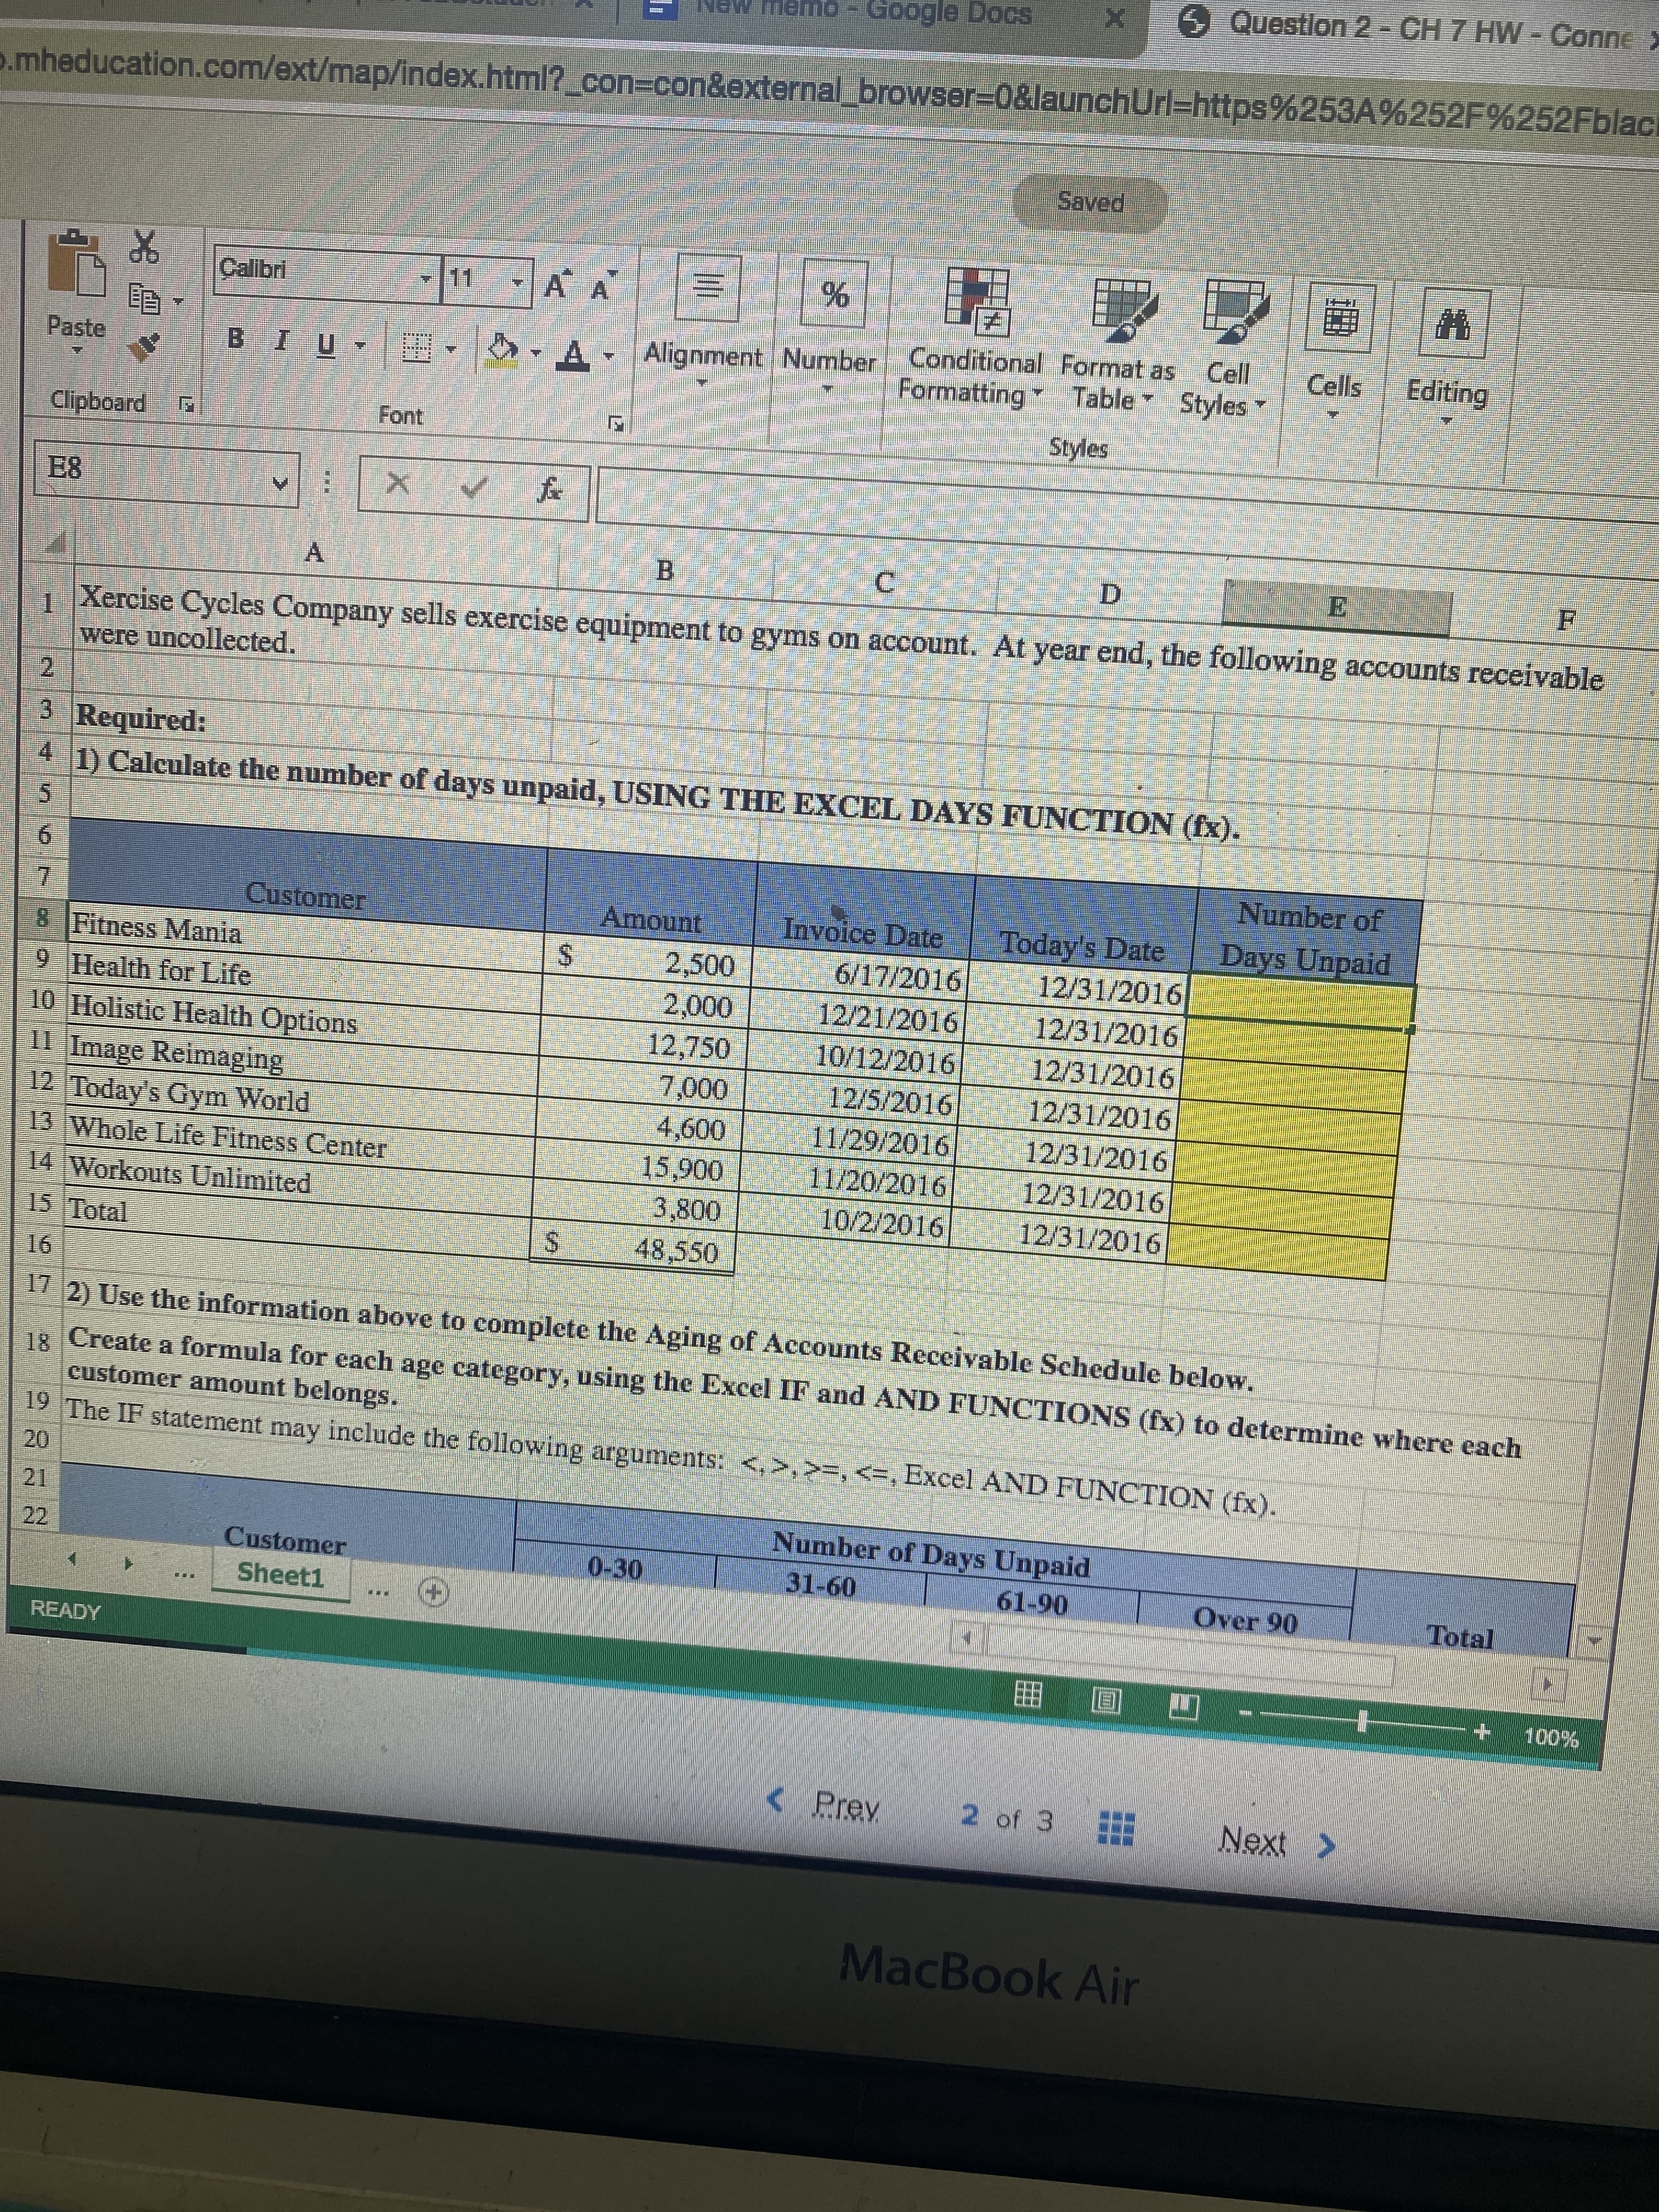 2) Use the information above to complete the Aging of Accounts Receivable Schedule below.
Create a formula for cach age category, using the Excel IF and AND FUNCTIONS (fx) to determine wh
customer amount belongs.
The IF statement may include the following arguments: <,>,>=, <=, Excel AND FUNCTION (fx).
